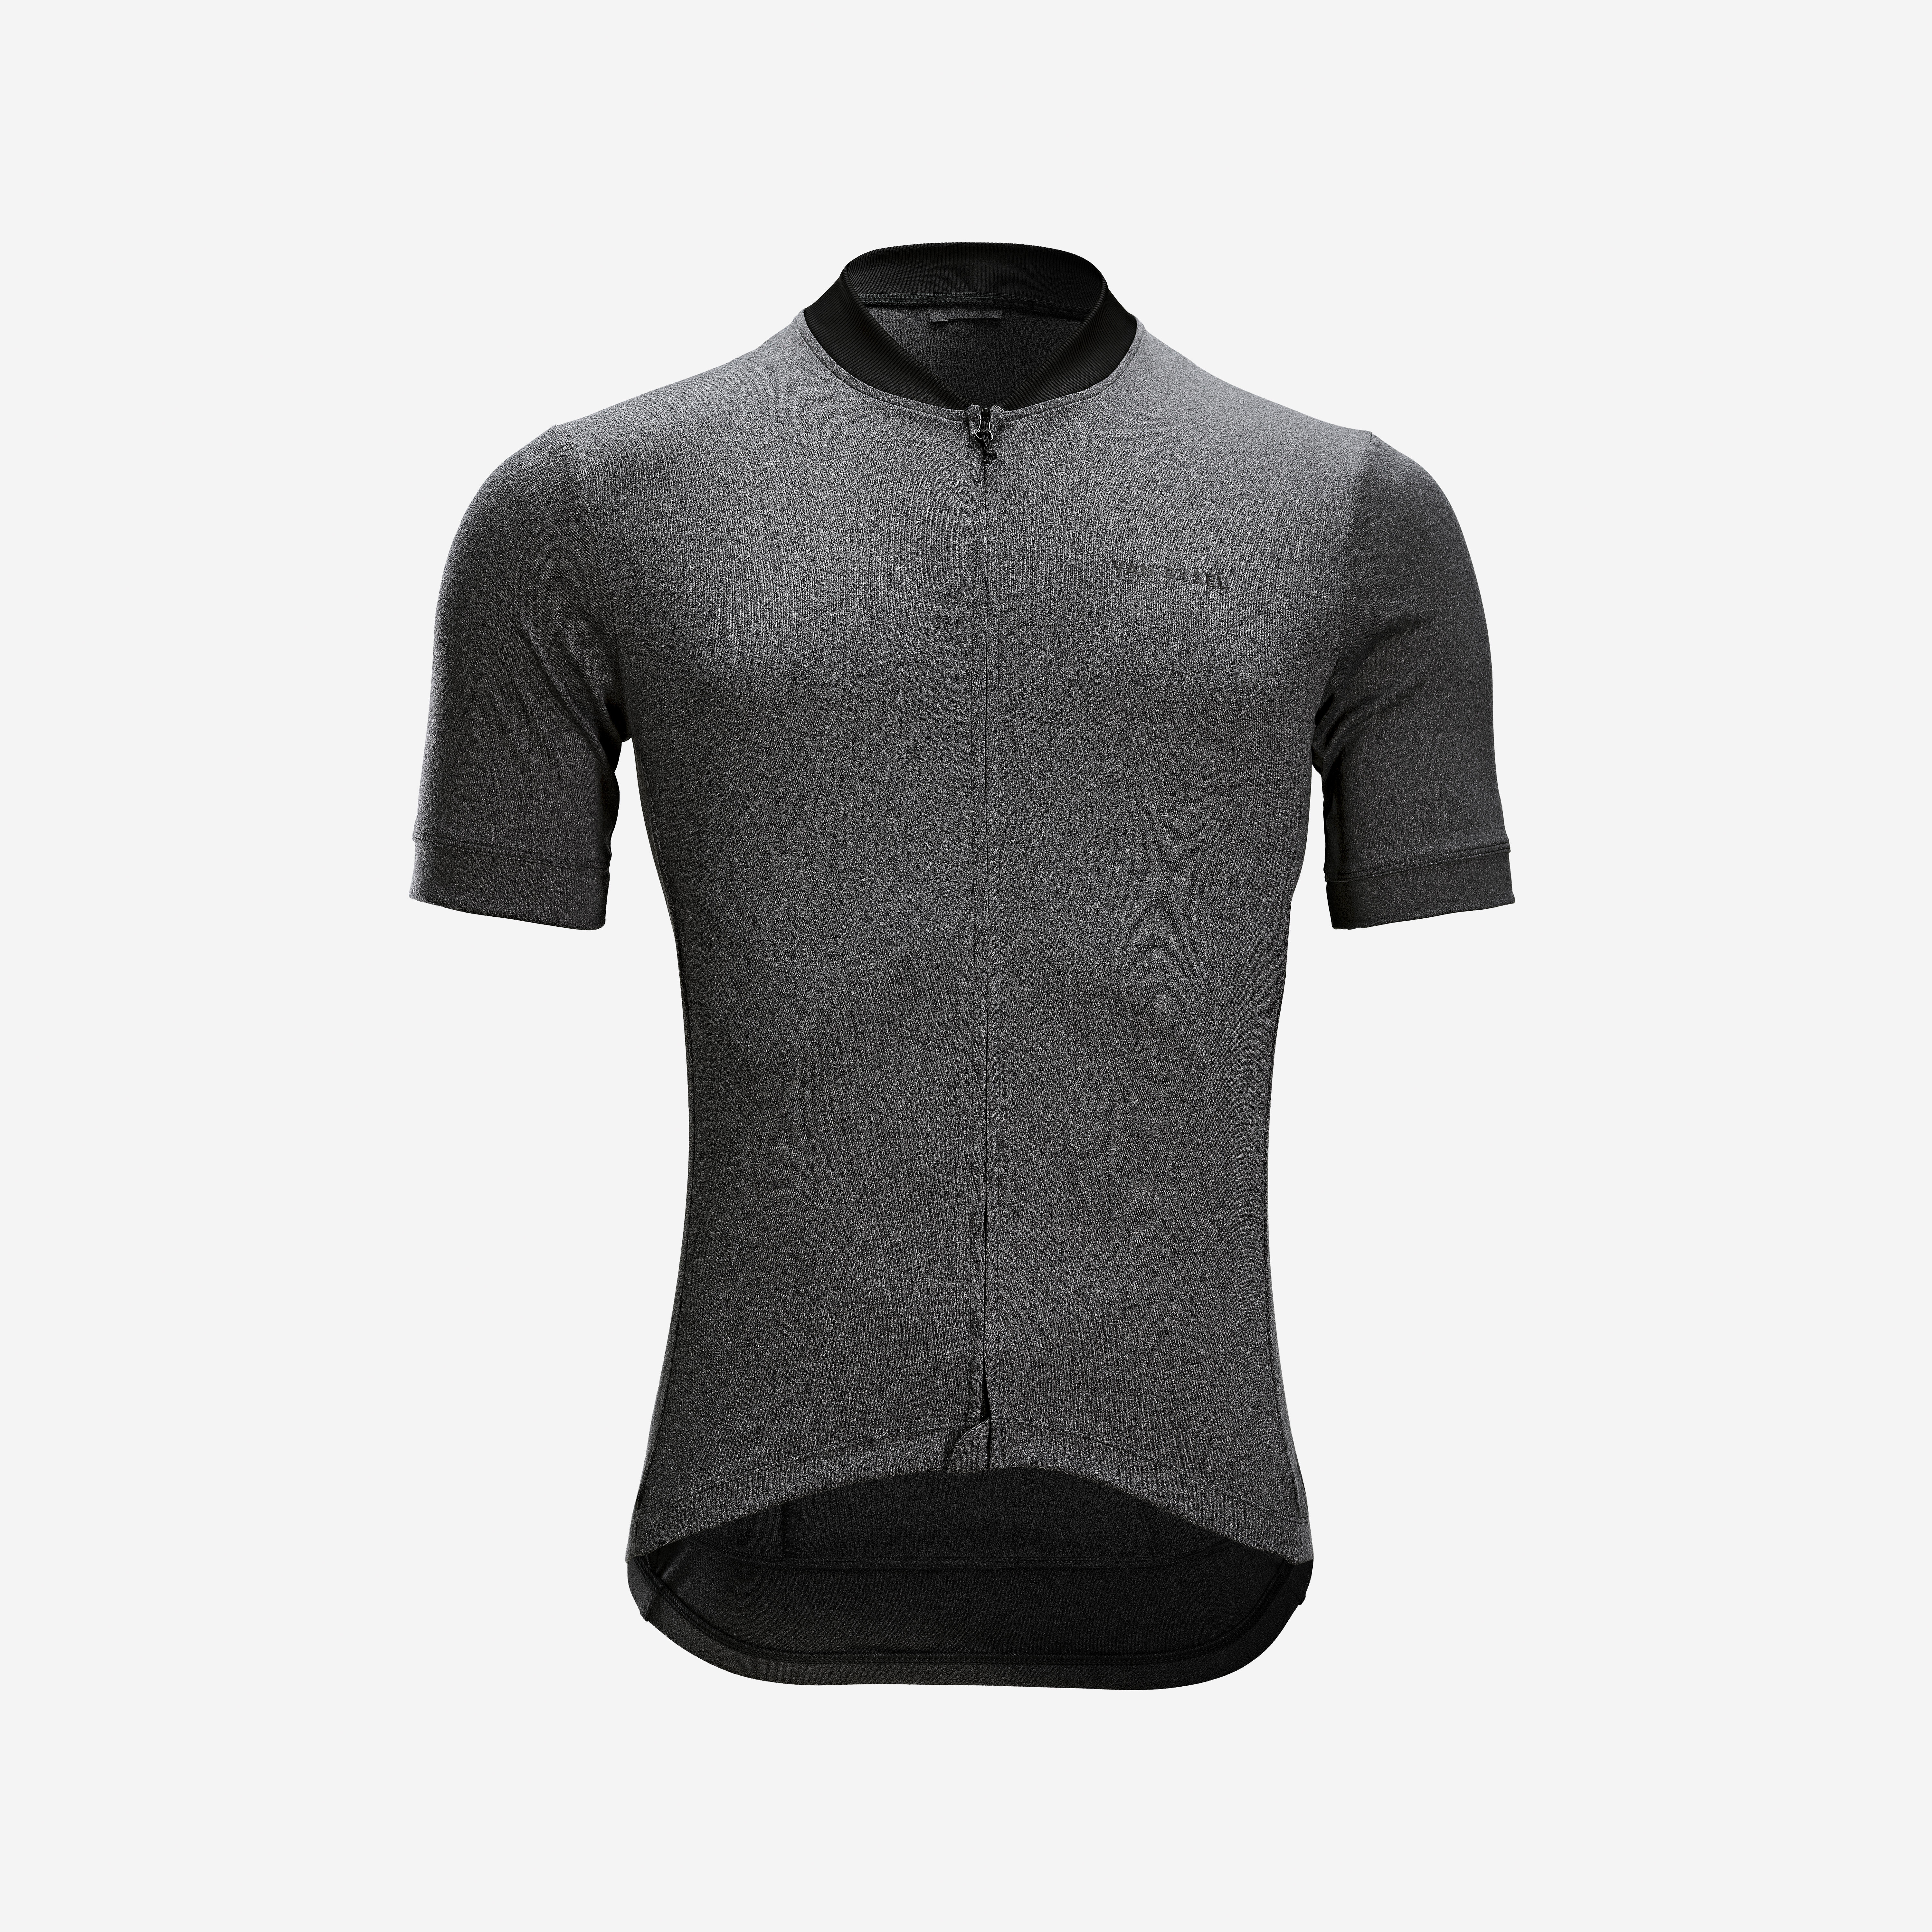 Men's Road Cycling Summer Jersey